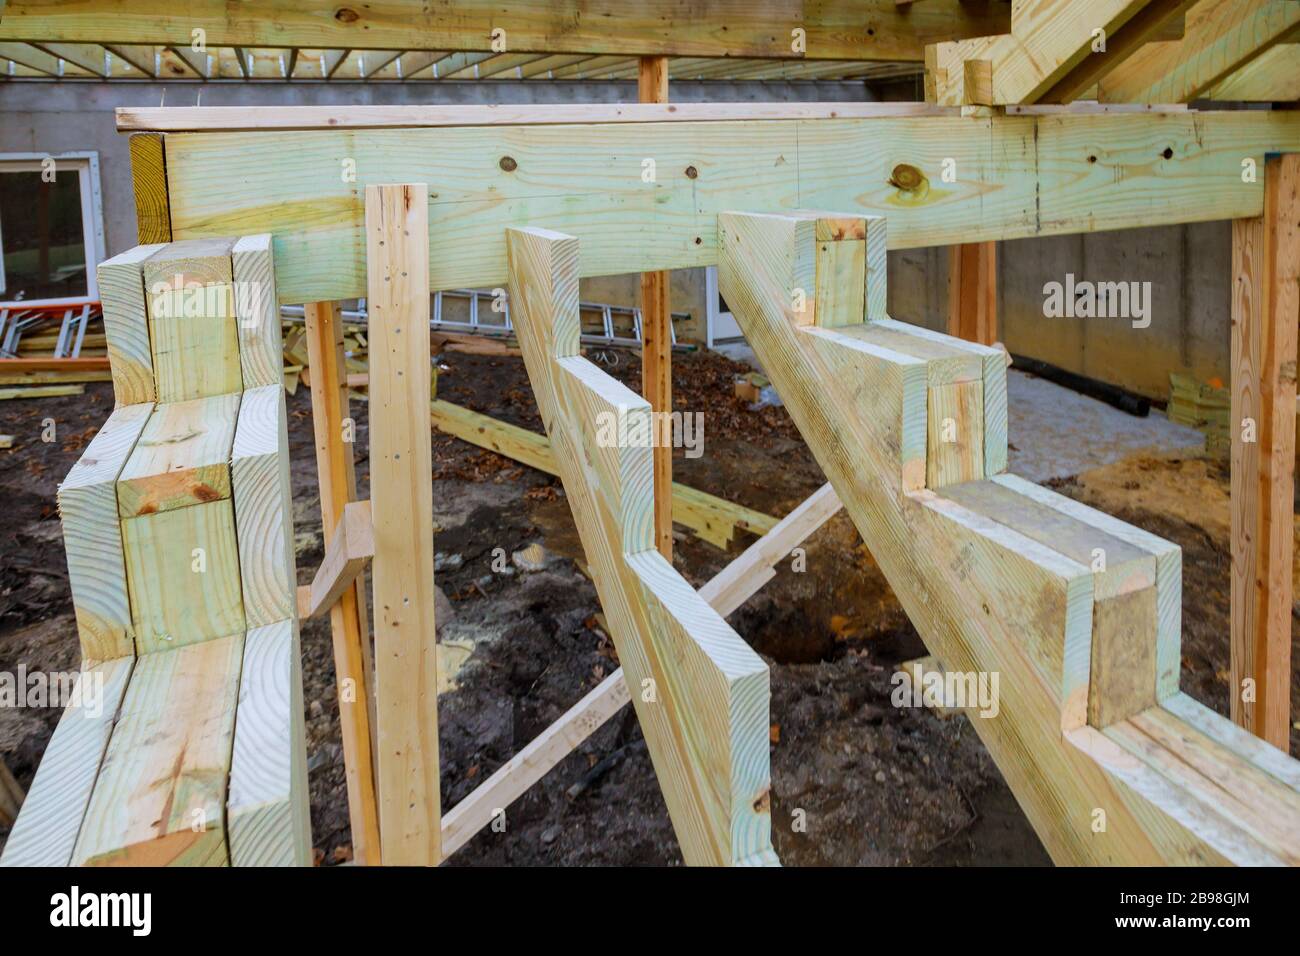 Installing deck patio construction. boards with above ground deck Stock  Photo - Alamy